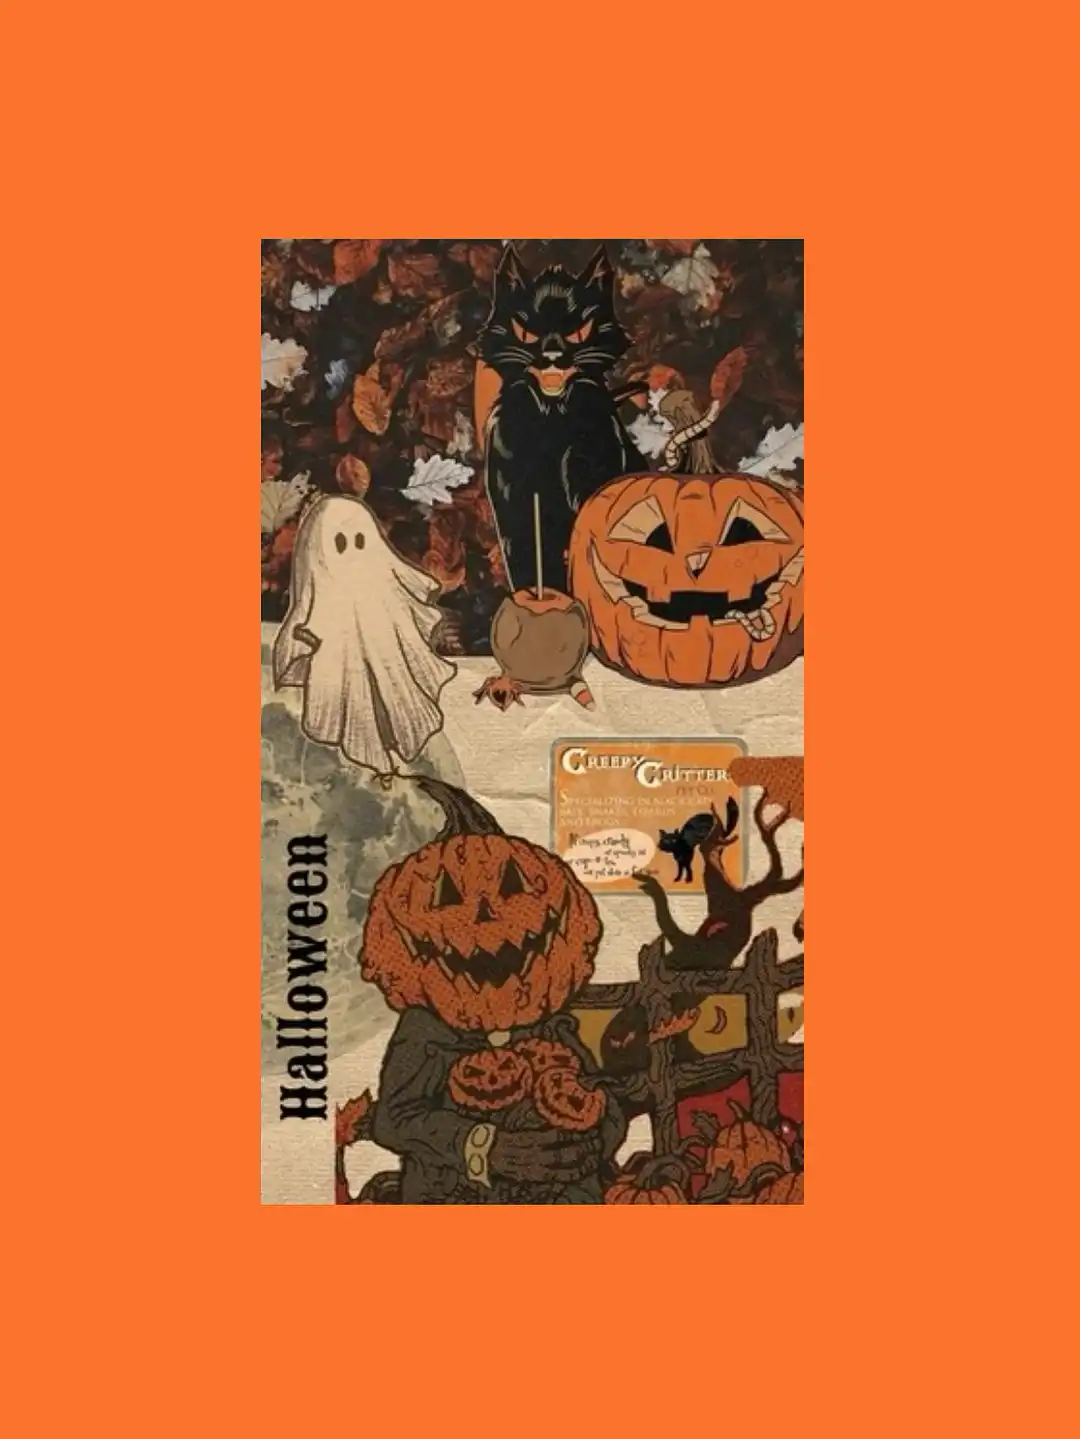 A vintage Halloween postcard with a black cat, ghost, and jack-o-lanterns. - Spooky